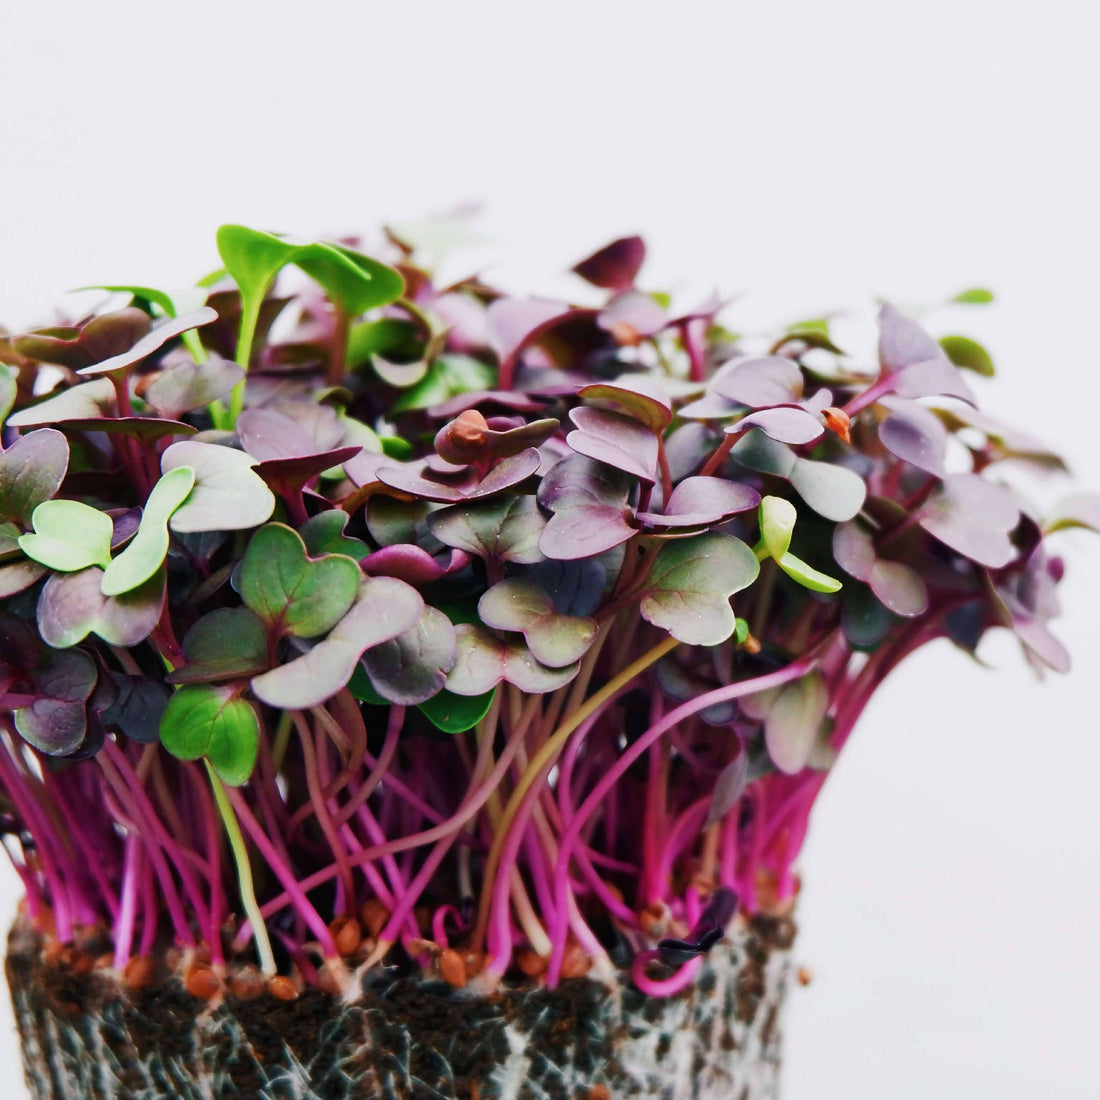 Wondrous Microgreens: Tasty, Nutritious, Easy to Cook with